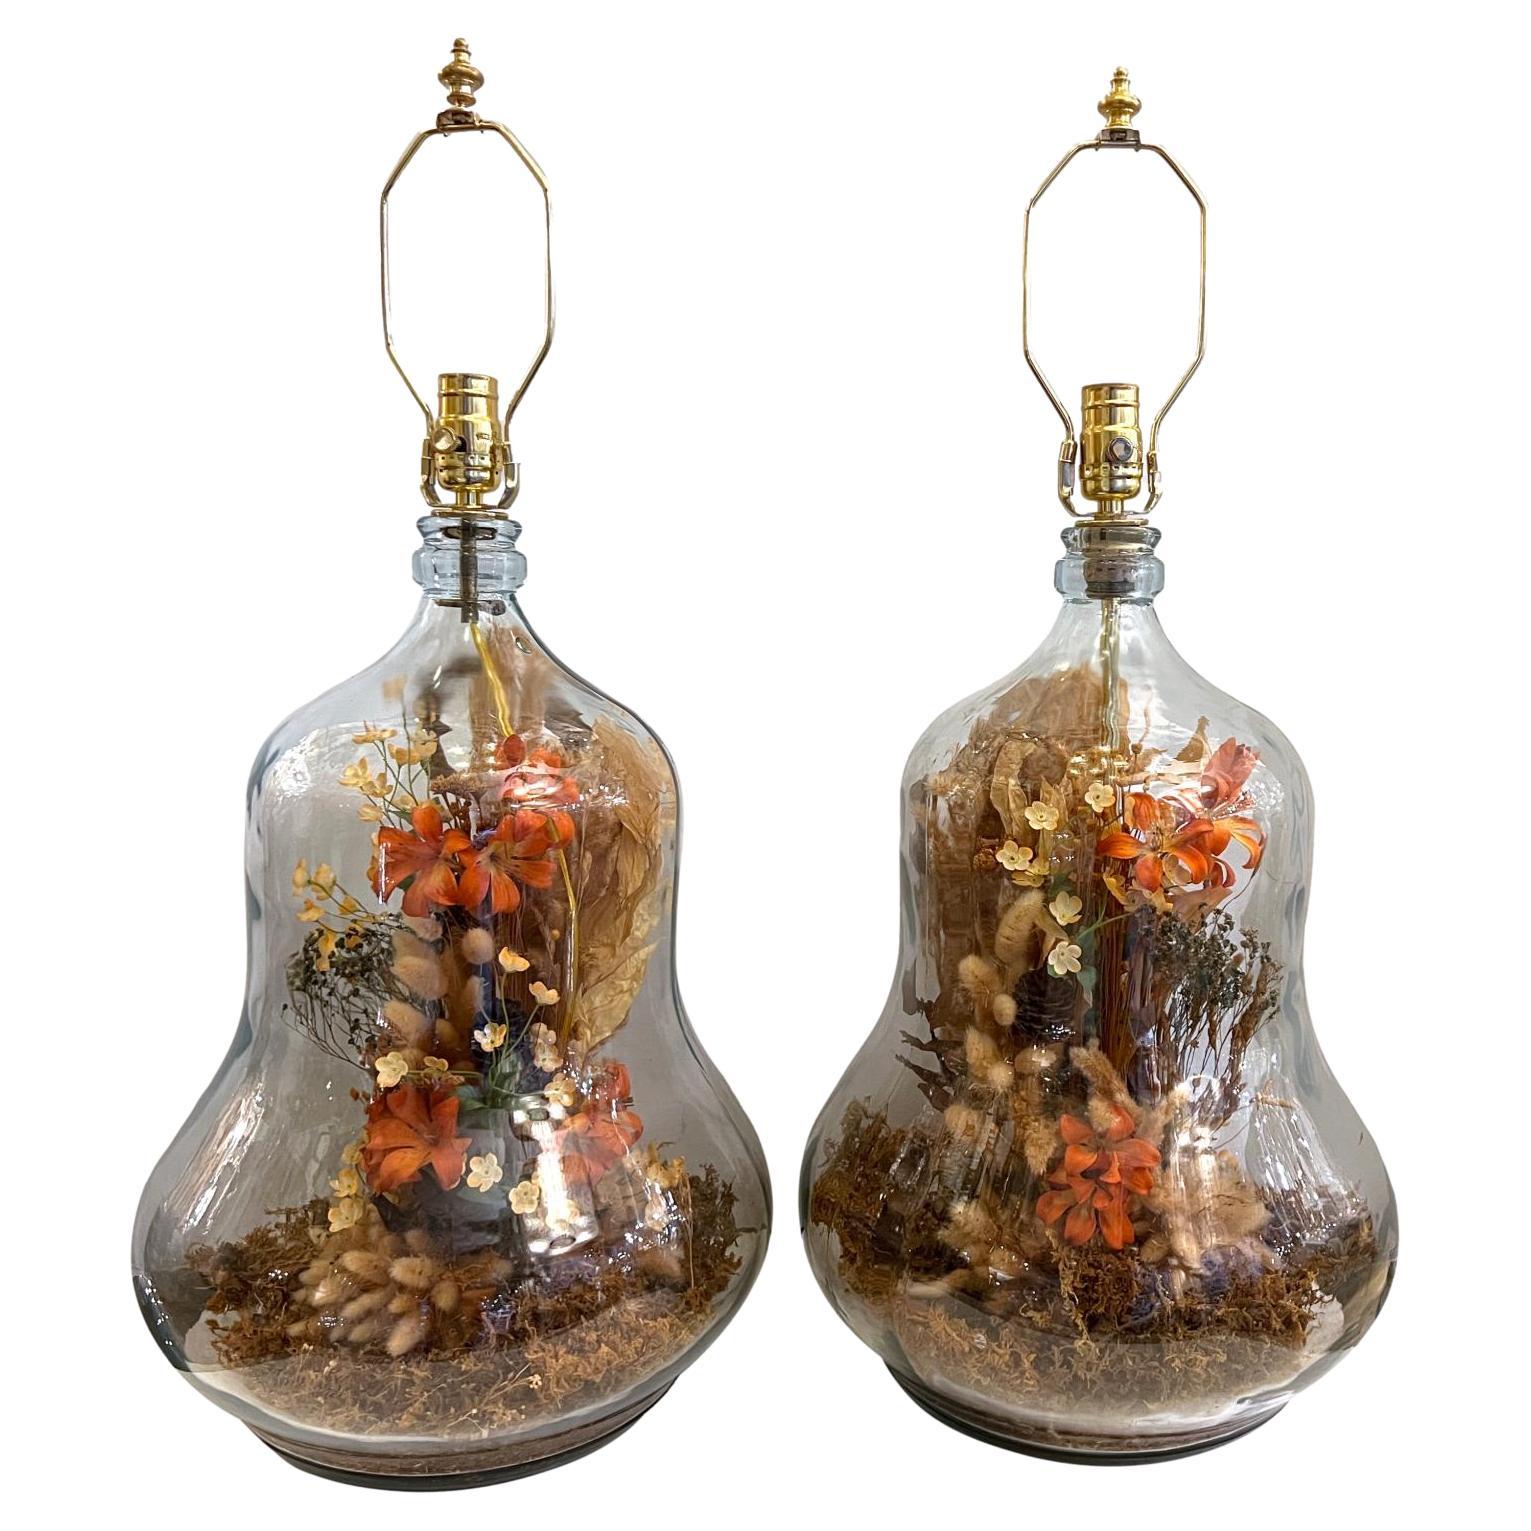 Pair of Vintage Foliage Lamps For Sale